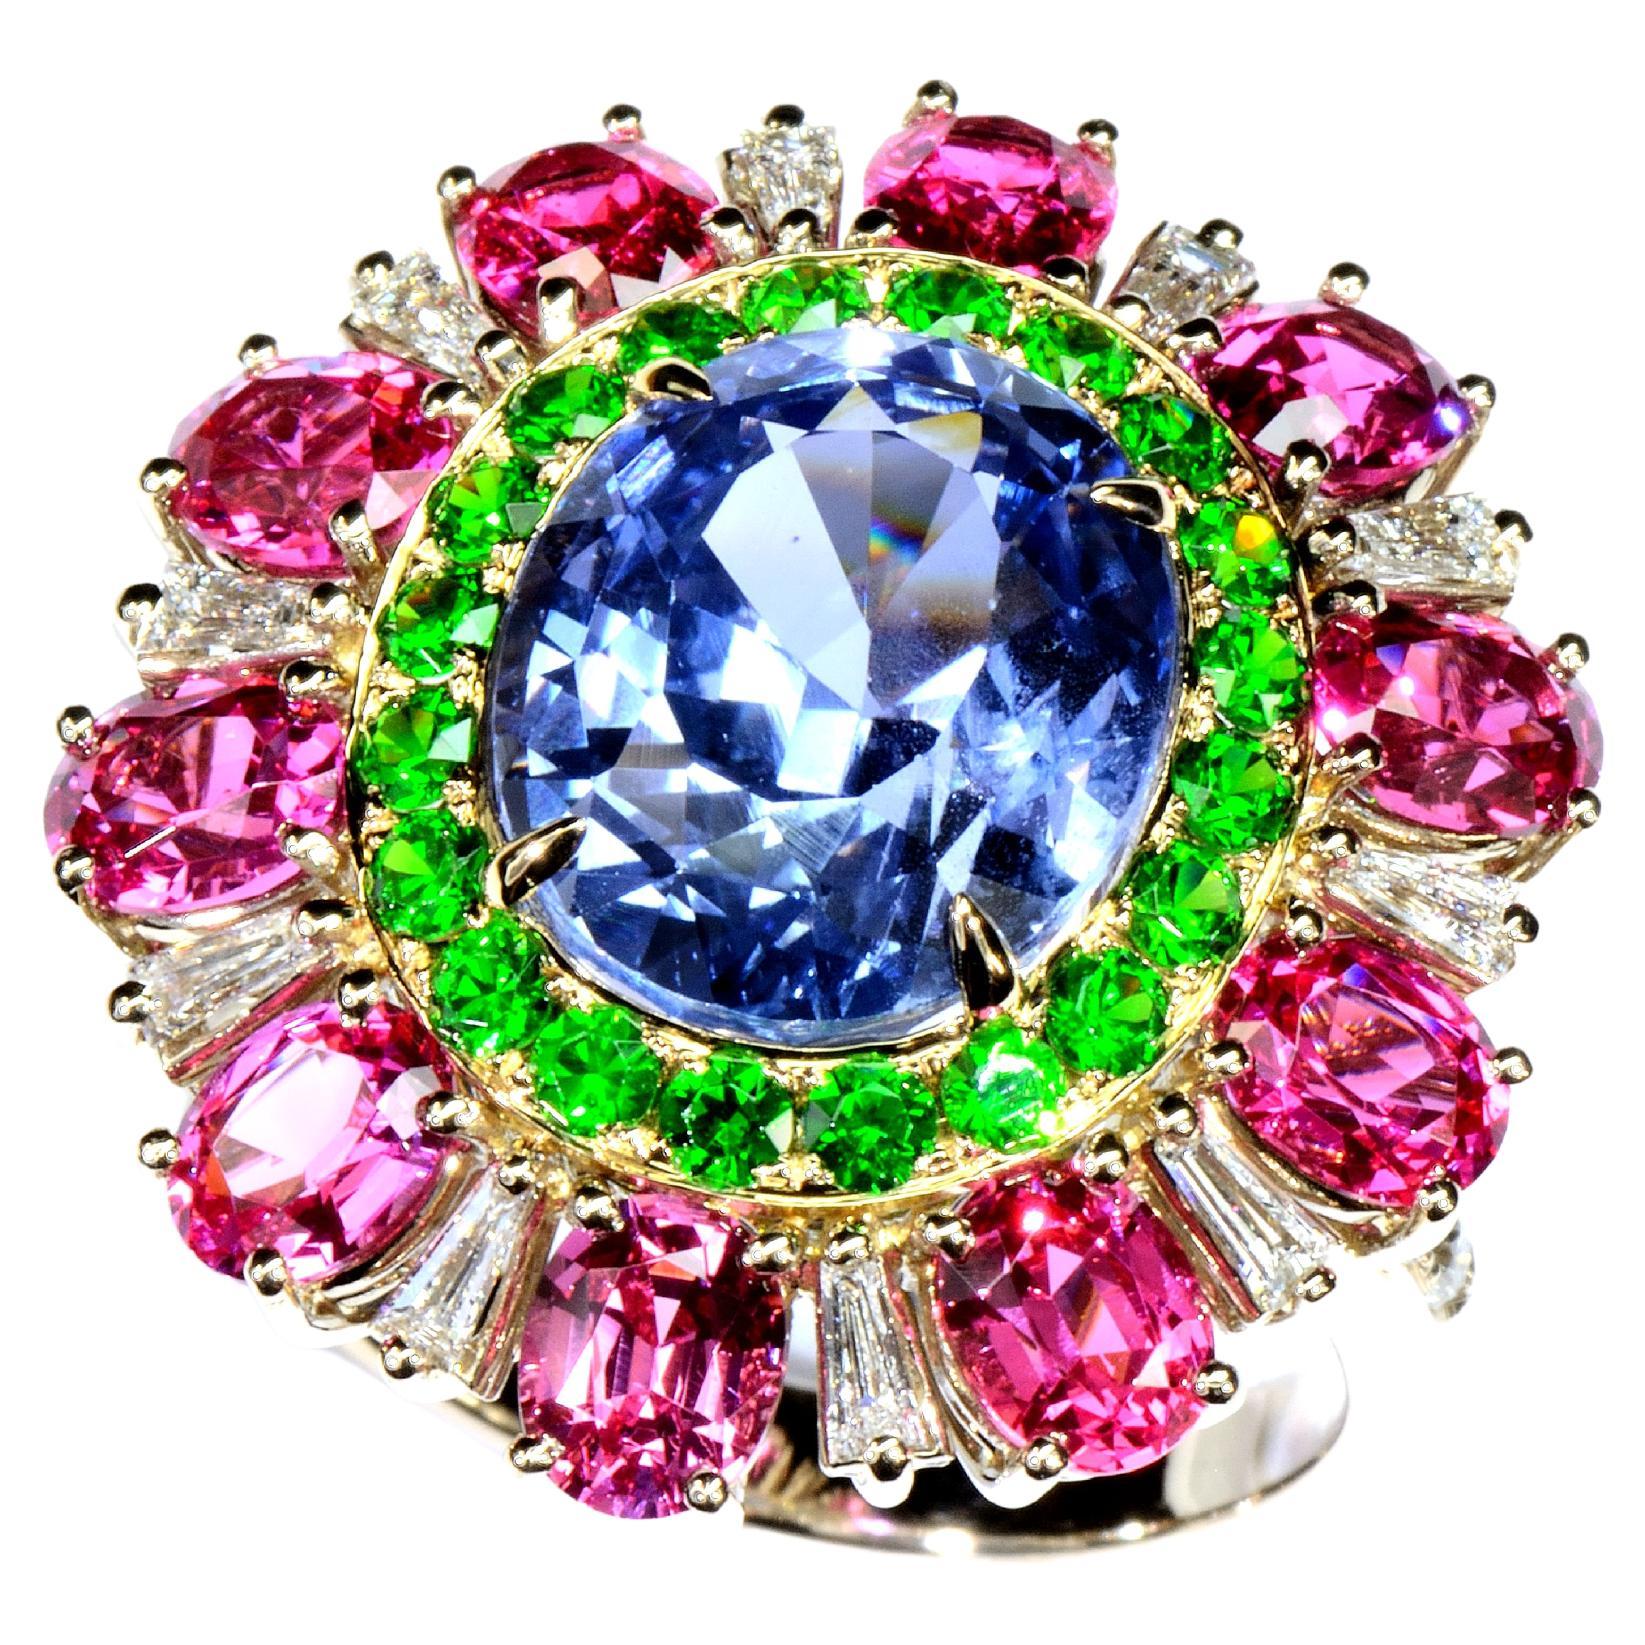 Flower ring with non heated  central Blue Sapphire from Sri Lanka, emeralds and Spinels in 18k gold 
Not Heated central Sapphire  8.27 cts
20 green garnets  0.76 cts
10 pink spinels  4.46 cts
20 round diamonds  0.64 cts
Ring weight 10.88gr
Ring size